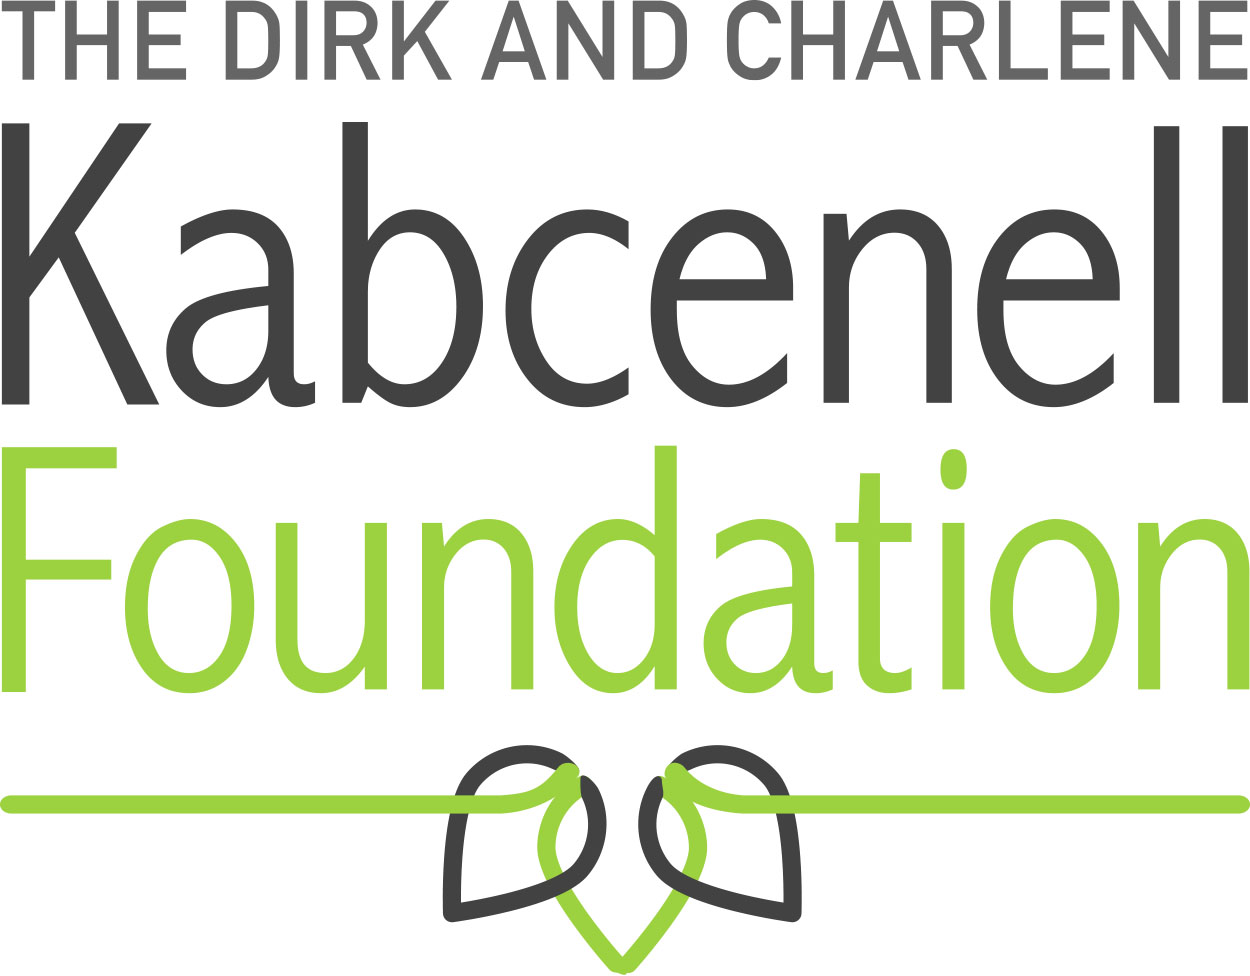 Dirk and Charlene Kabcenell Foundation logo